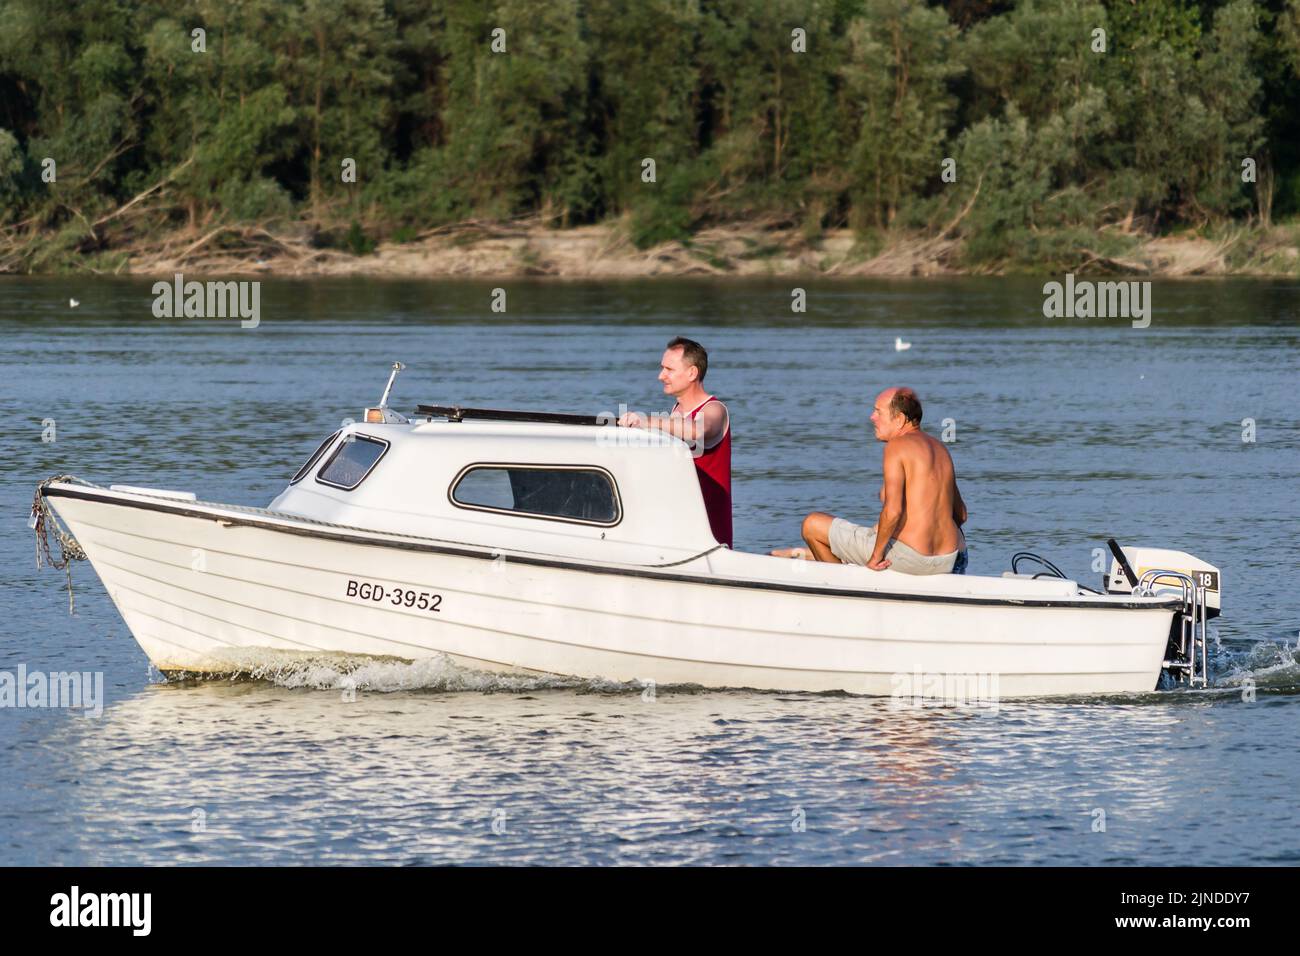 Novi Sad, Serbia - September 29. 2019: A panoramic view of the bank of the Danube river. A view of a small white boat with a cabin and passengers in t Stock Photo